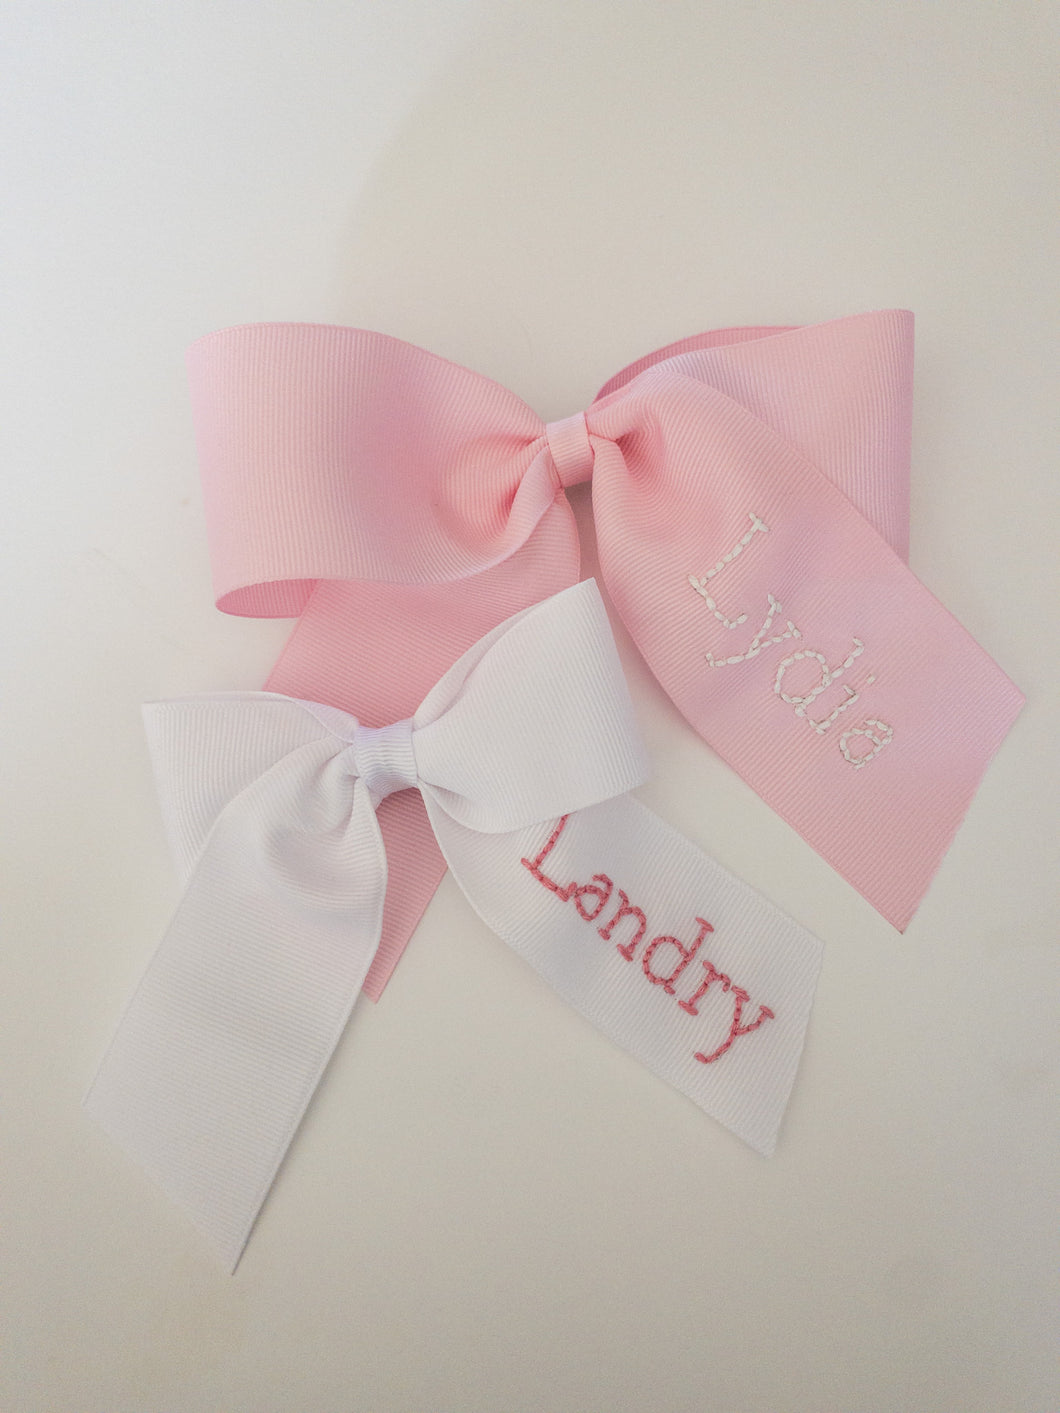 White Name on Light Pink Ribbon – A Girl and Two Bows